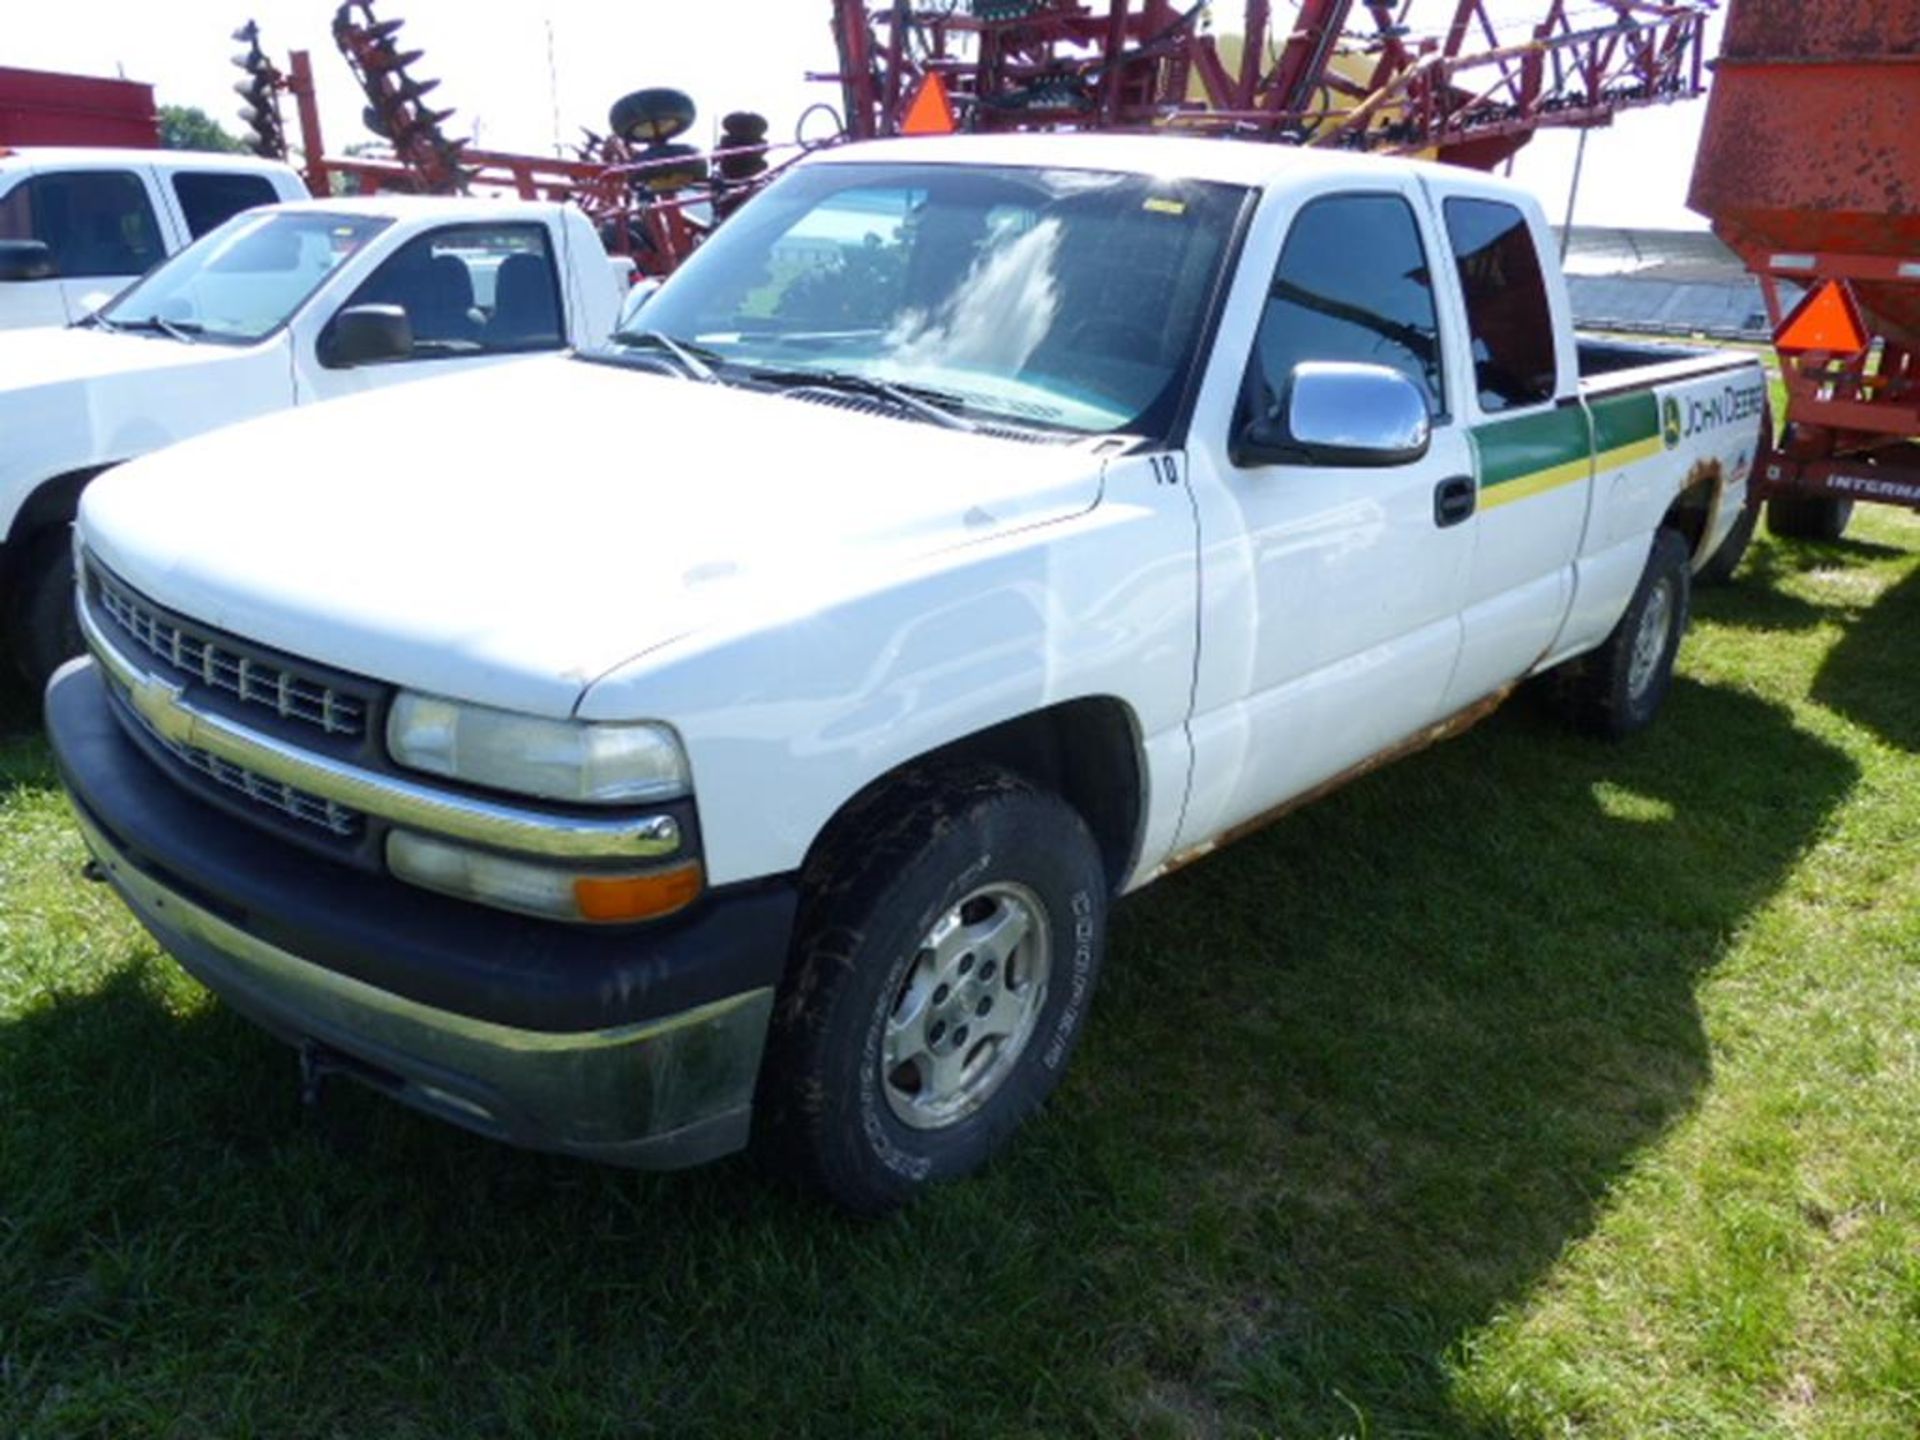 2001 CHEVY 1500 EXT CAB 4WD PICKUP, 6 1/2' BED, WHITE, ALUM RIMS, V-8,TRAILER HITCH, AUTO, CLOTH